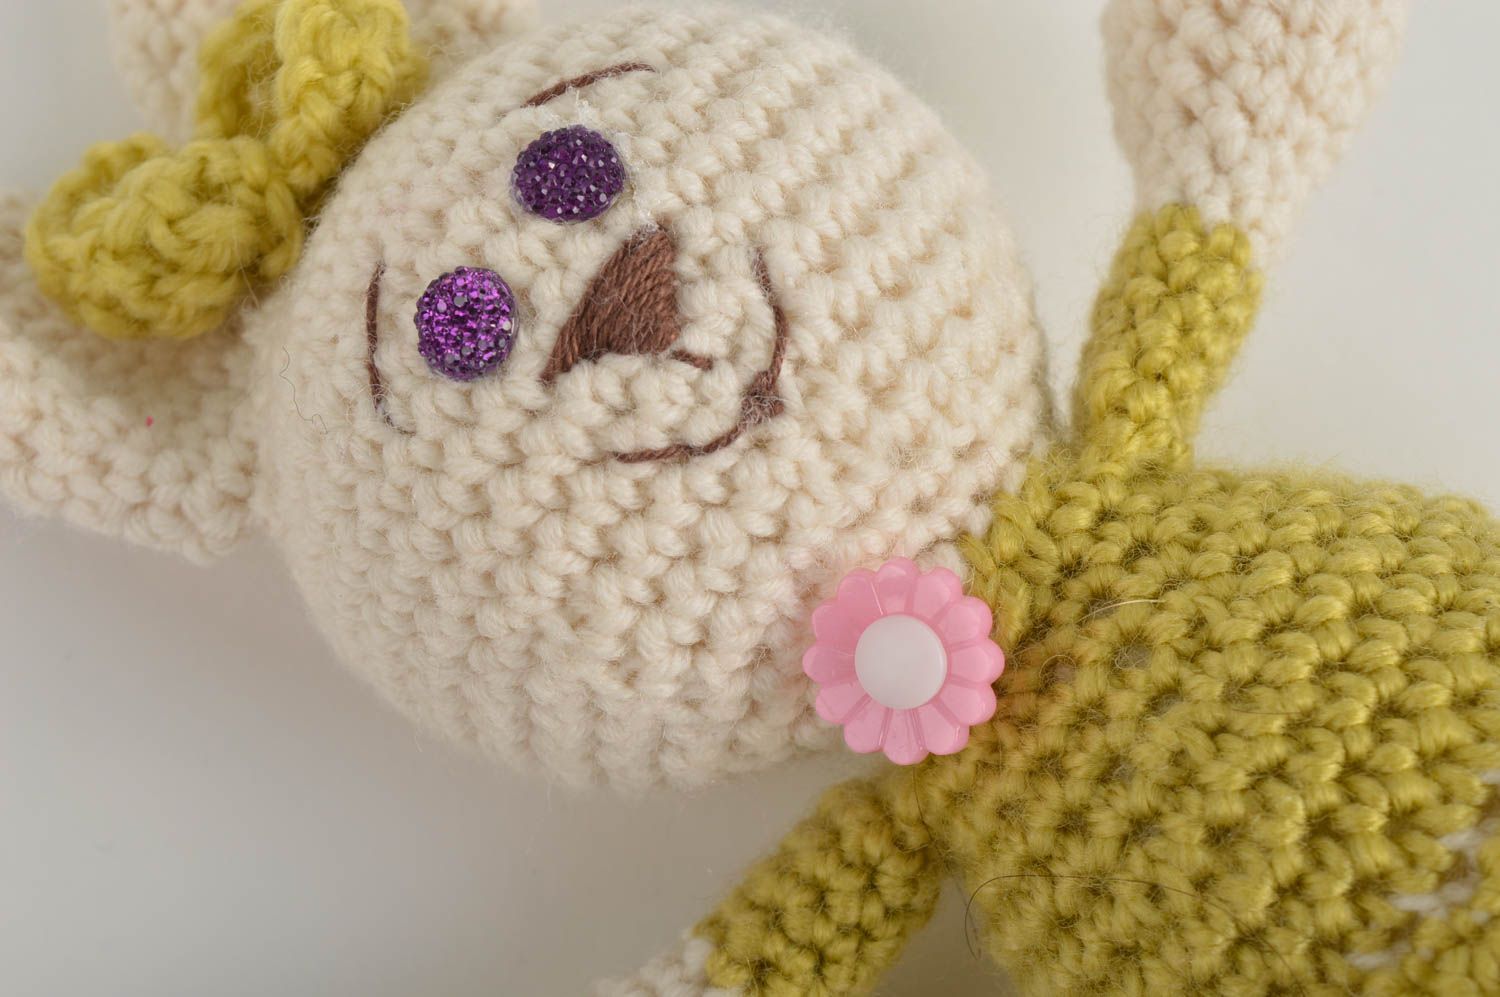 Beautiful handmade crochet toy soft toy cute toys for kids birthday gift ideas photo 5